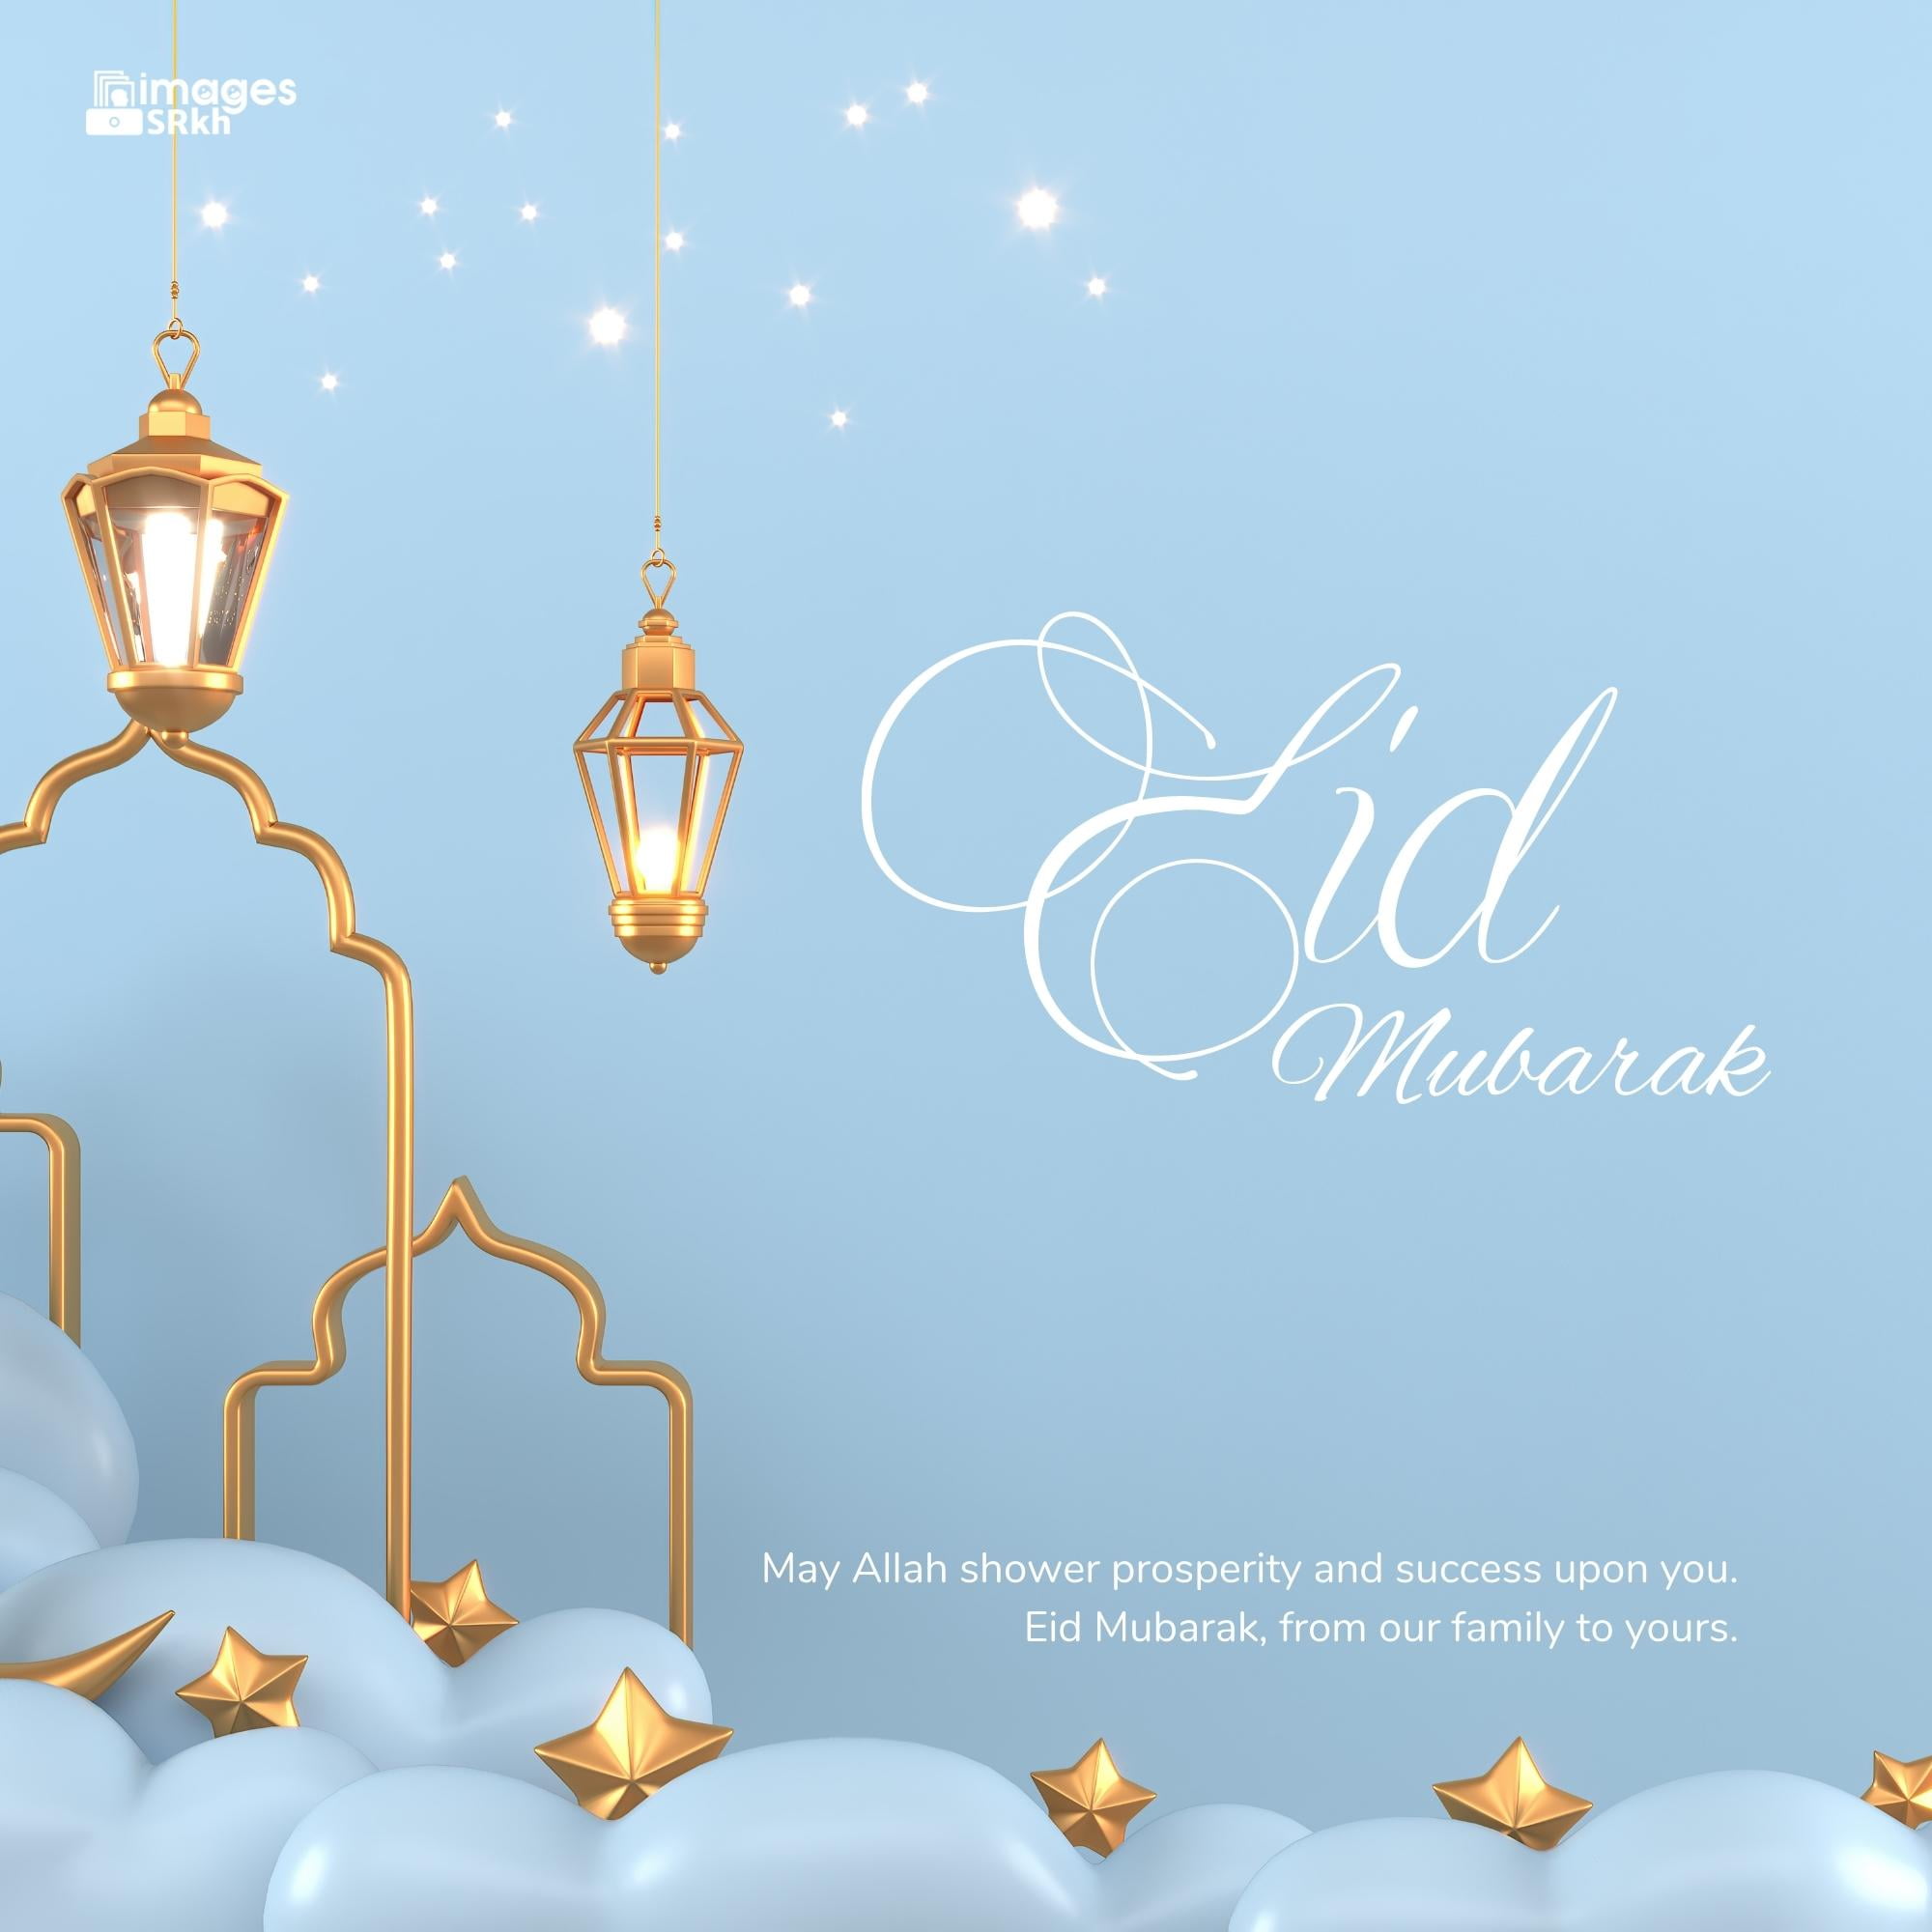 Wishes To Eid Mubarak | Download free in Hd Quality | imagesSRkh